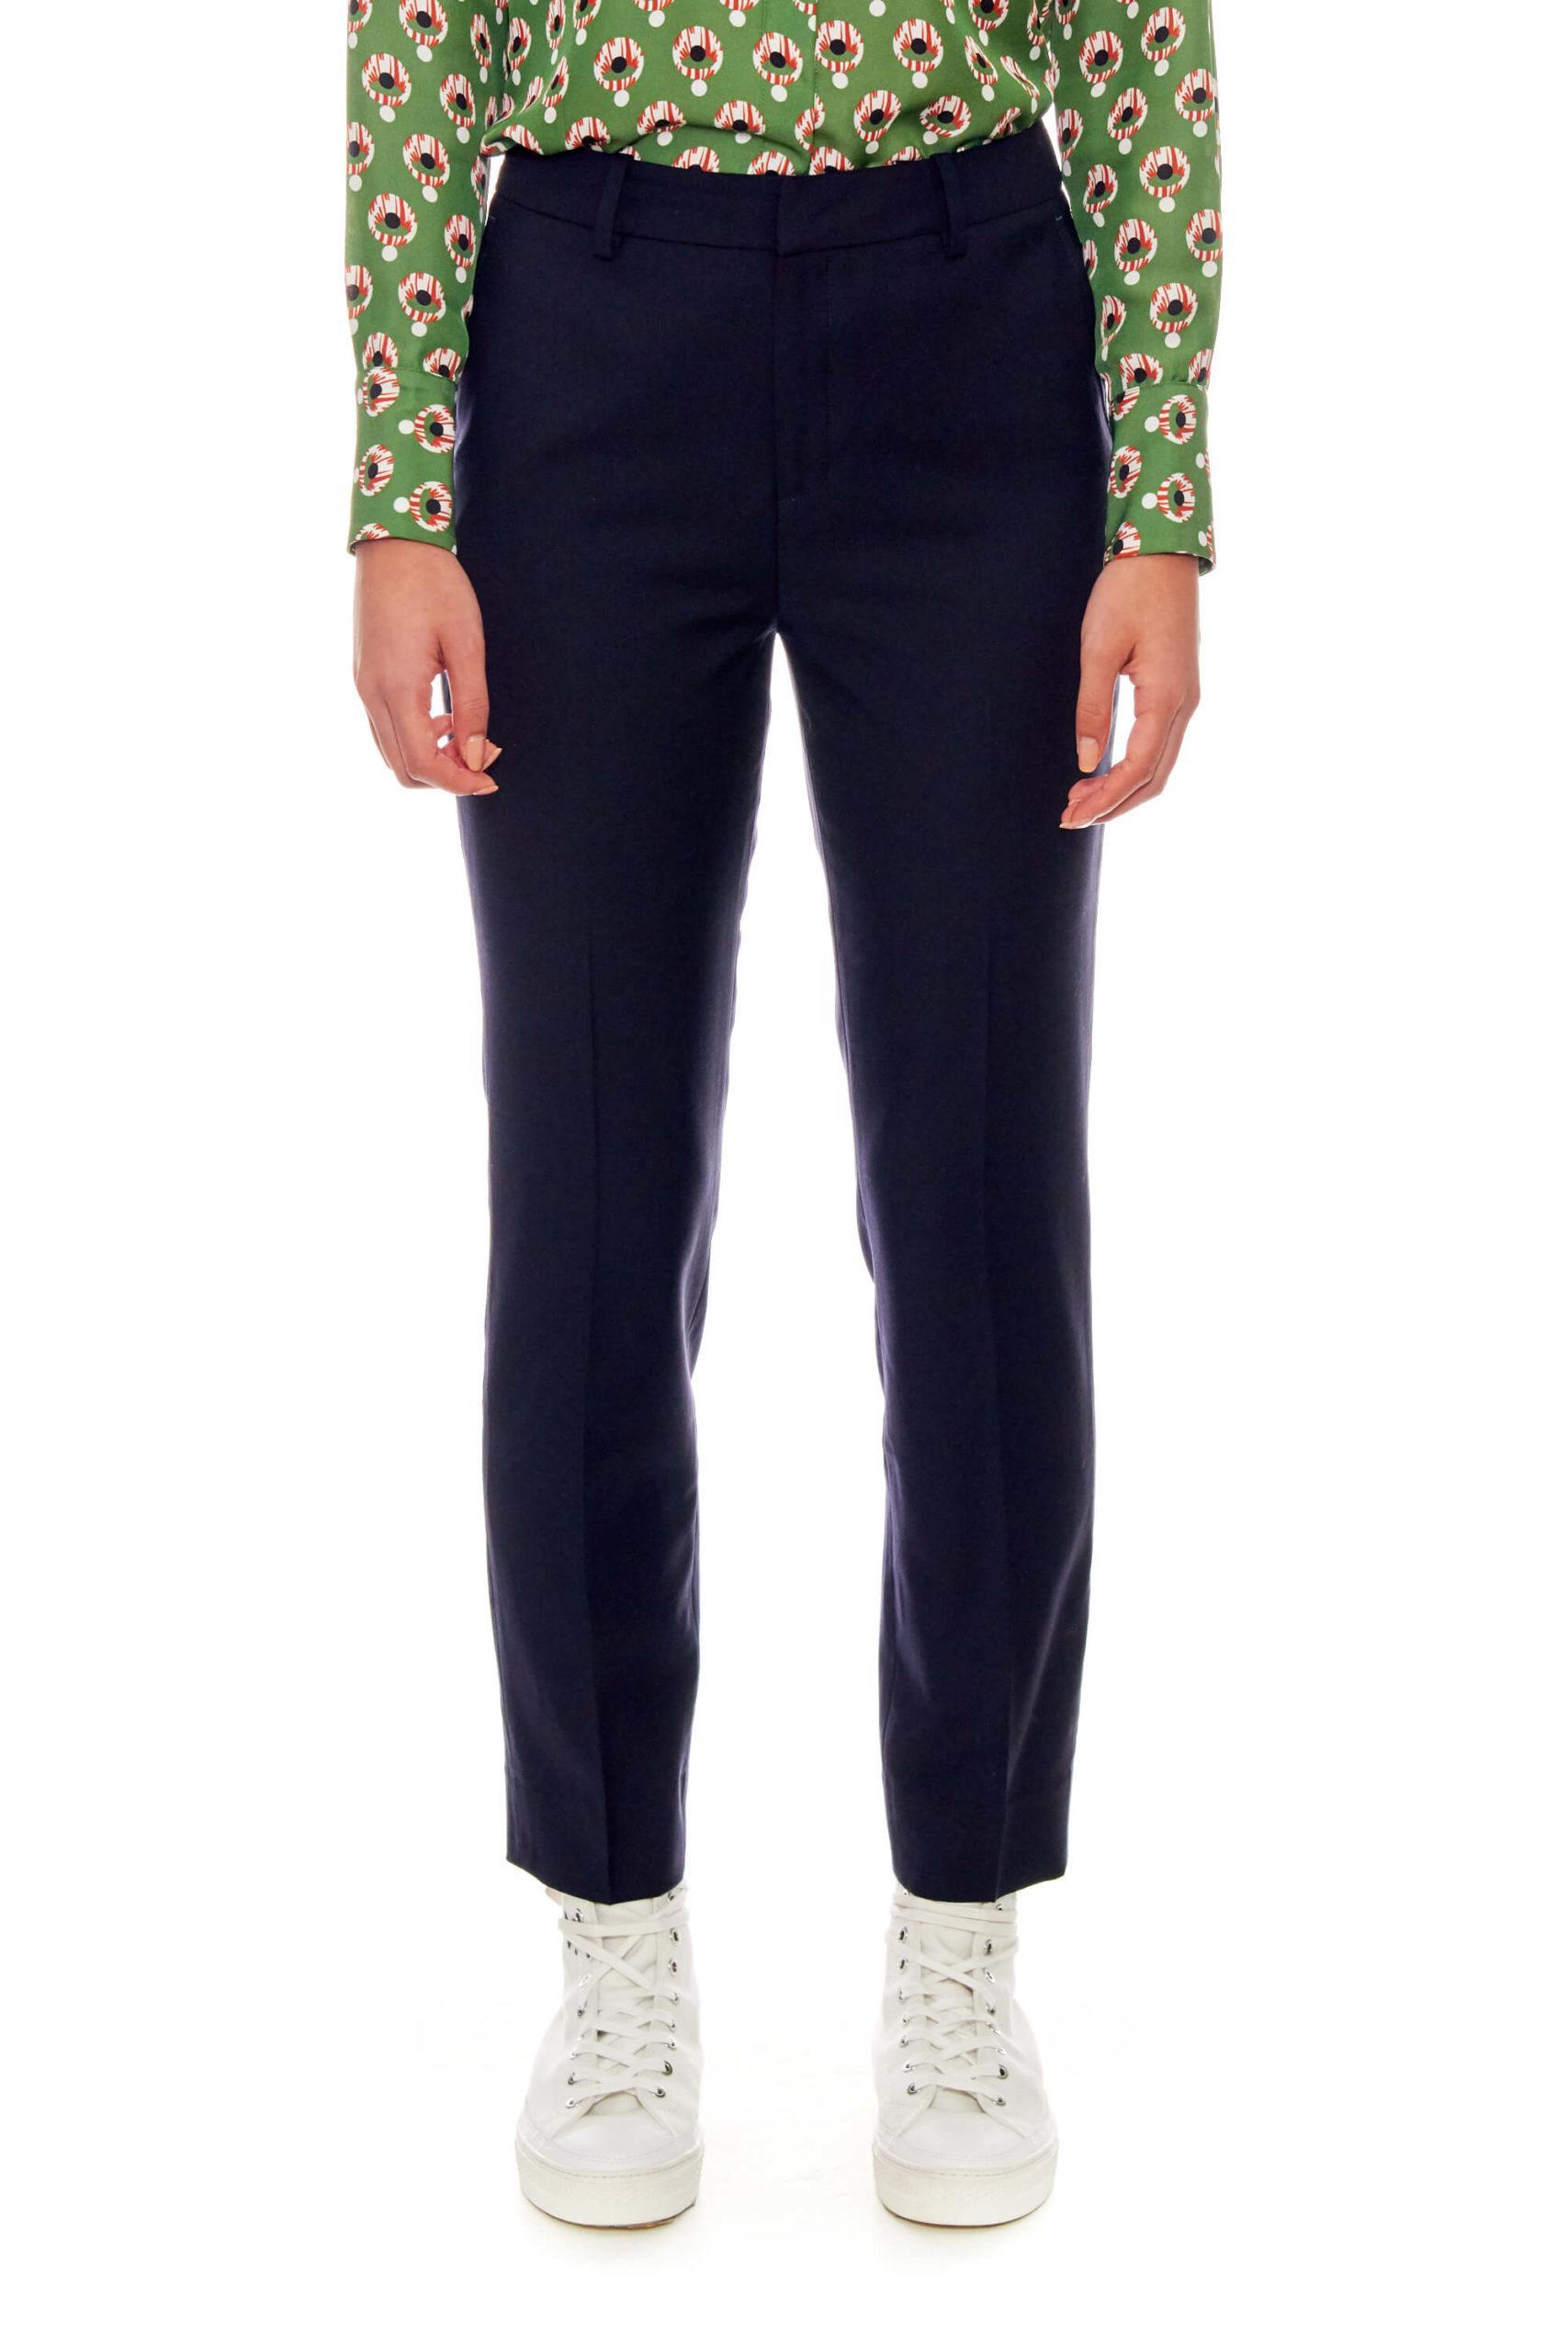 Dunkirk – High-waisted cigarette trousers in navy0